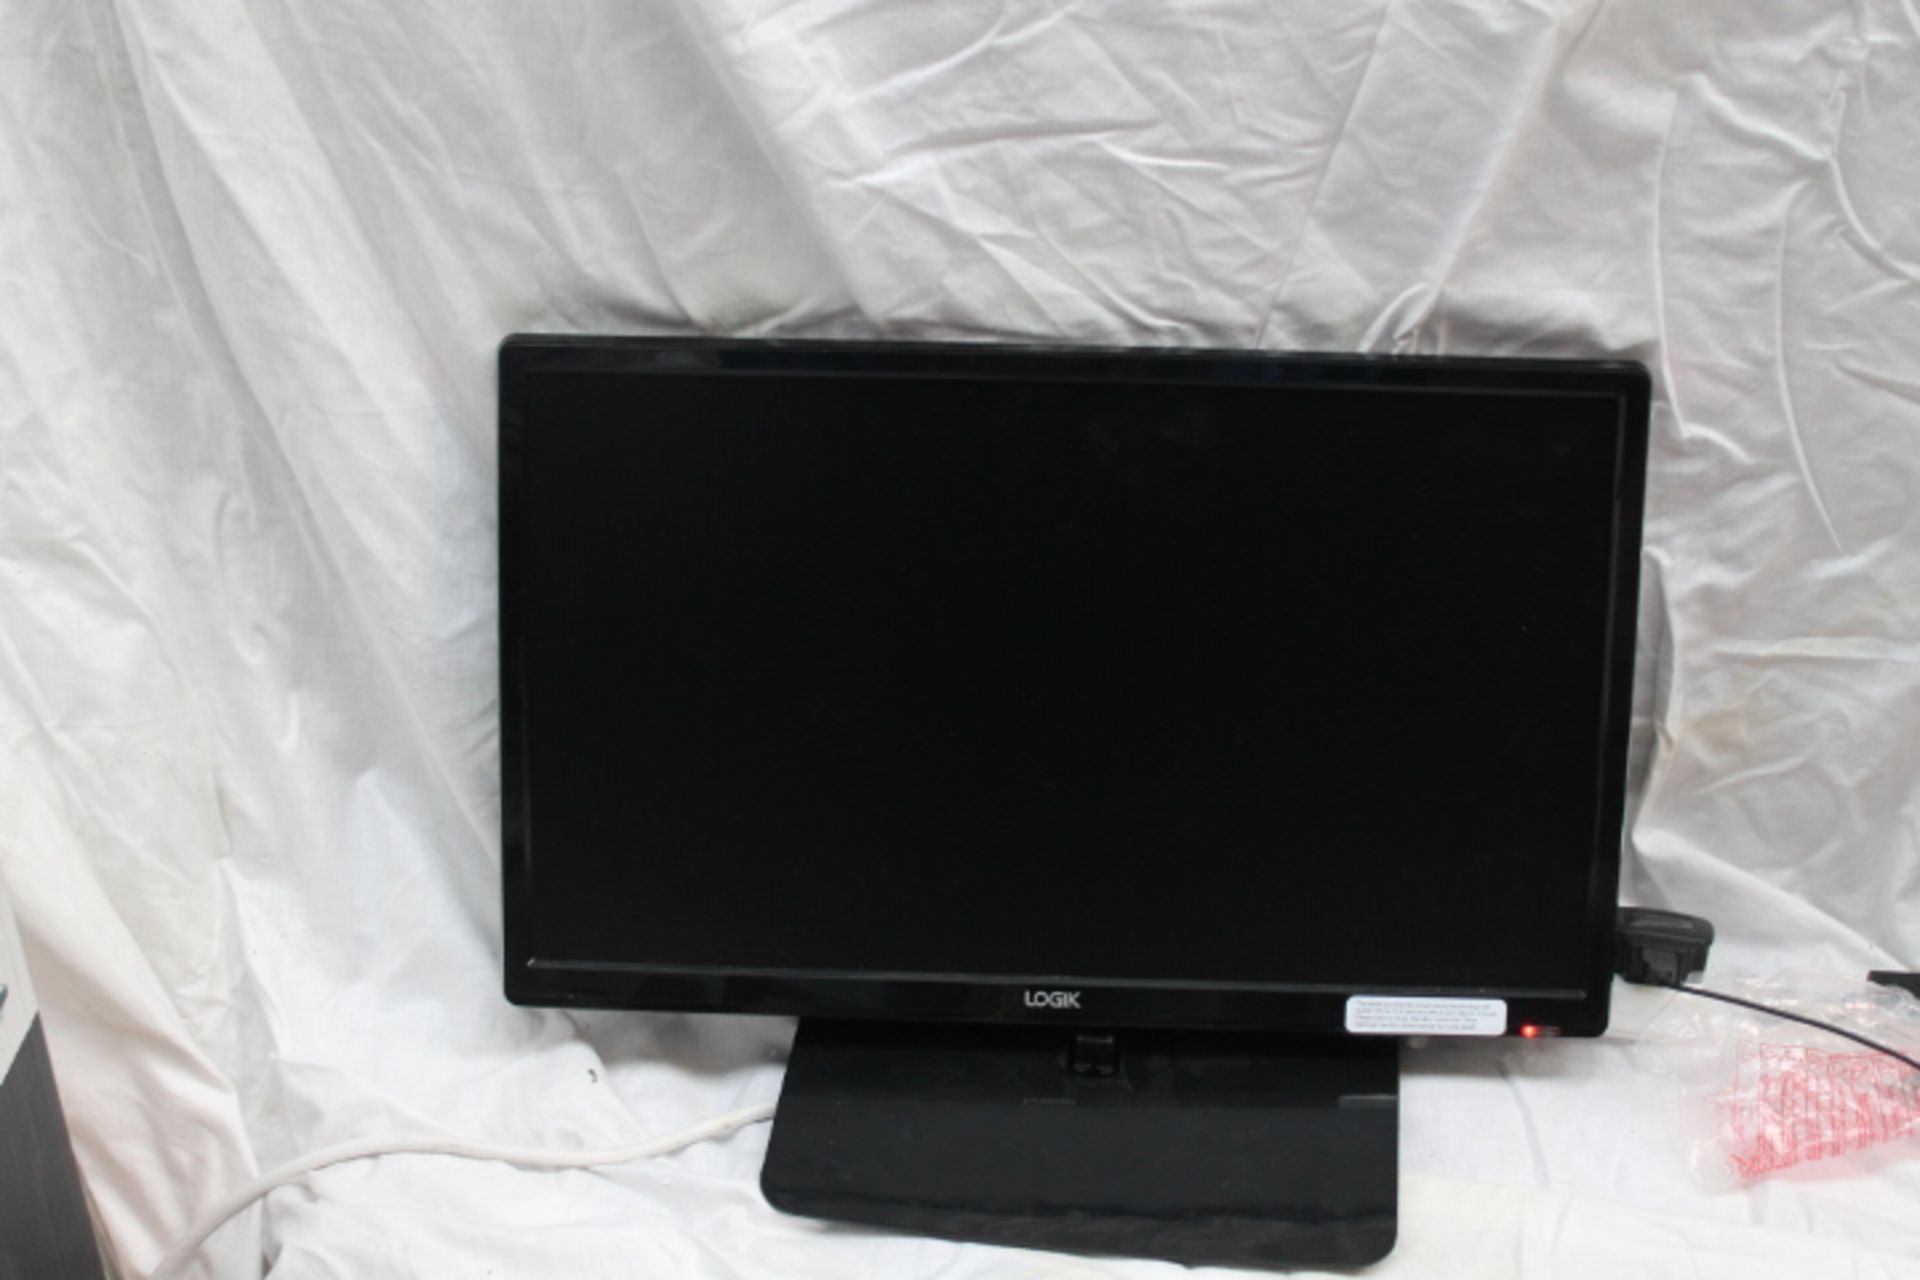 V Grade U Logik 22 Inch Led TV With Built-In DVD Player Stand Plus Remote - Powers On But No Display